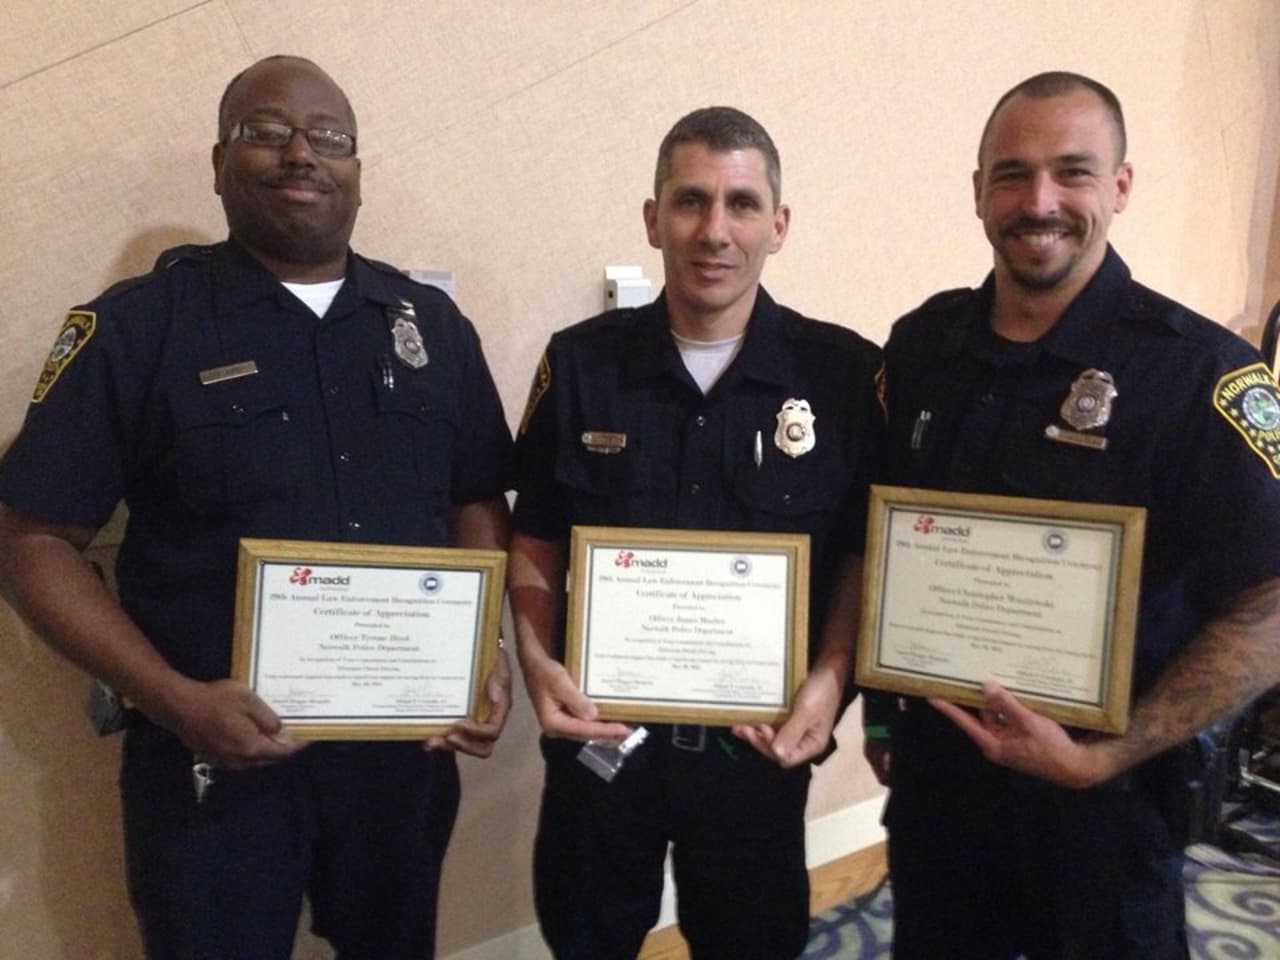 From left, Norwalk Police Officers Tyrone Boyd, James Mosher, and Christopher Wasilewski.